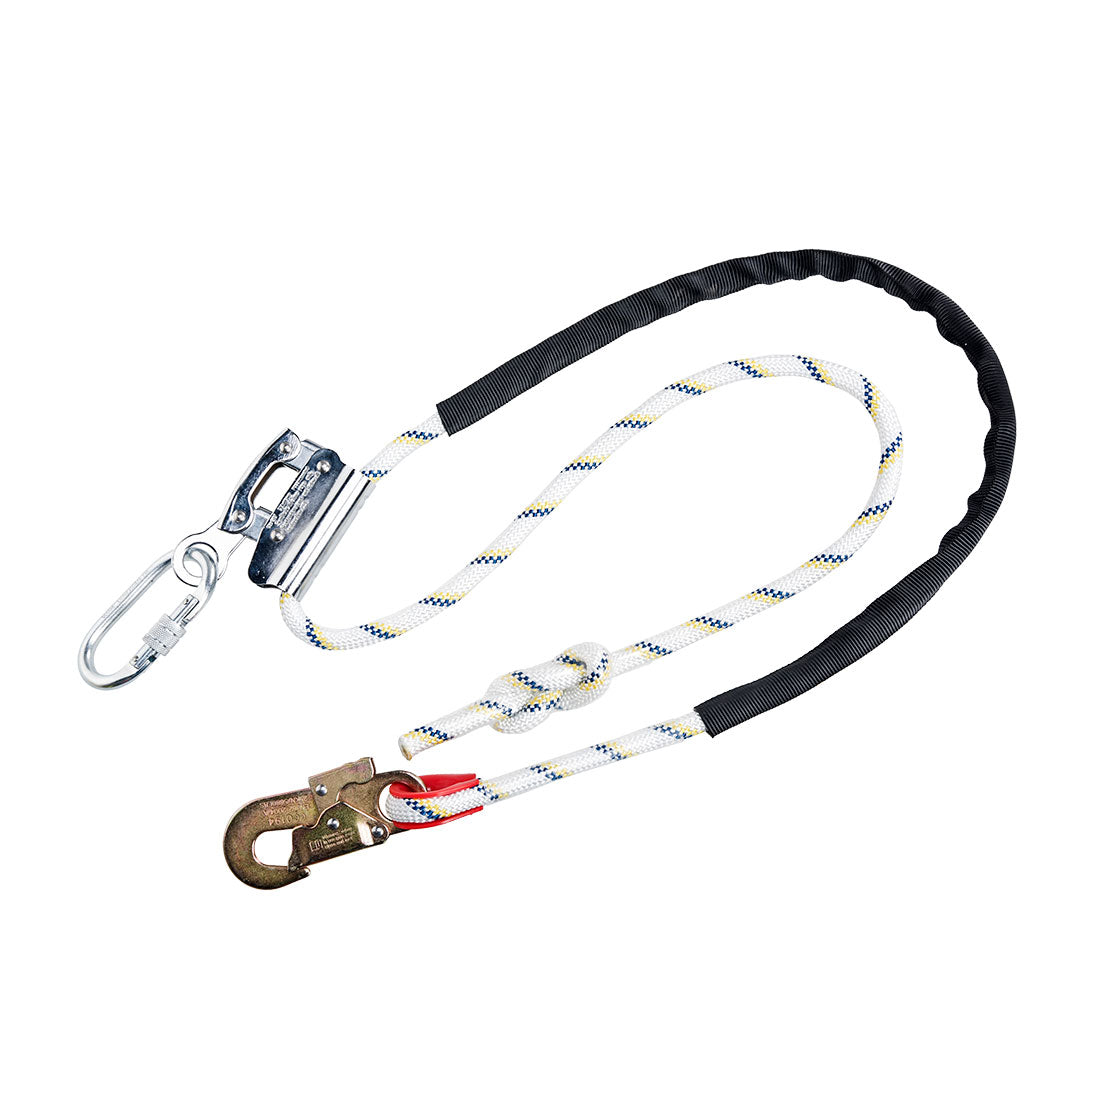 Work Positioning 2m Lanyard with Grip Adjuster  (FP26)